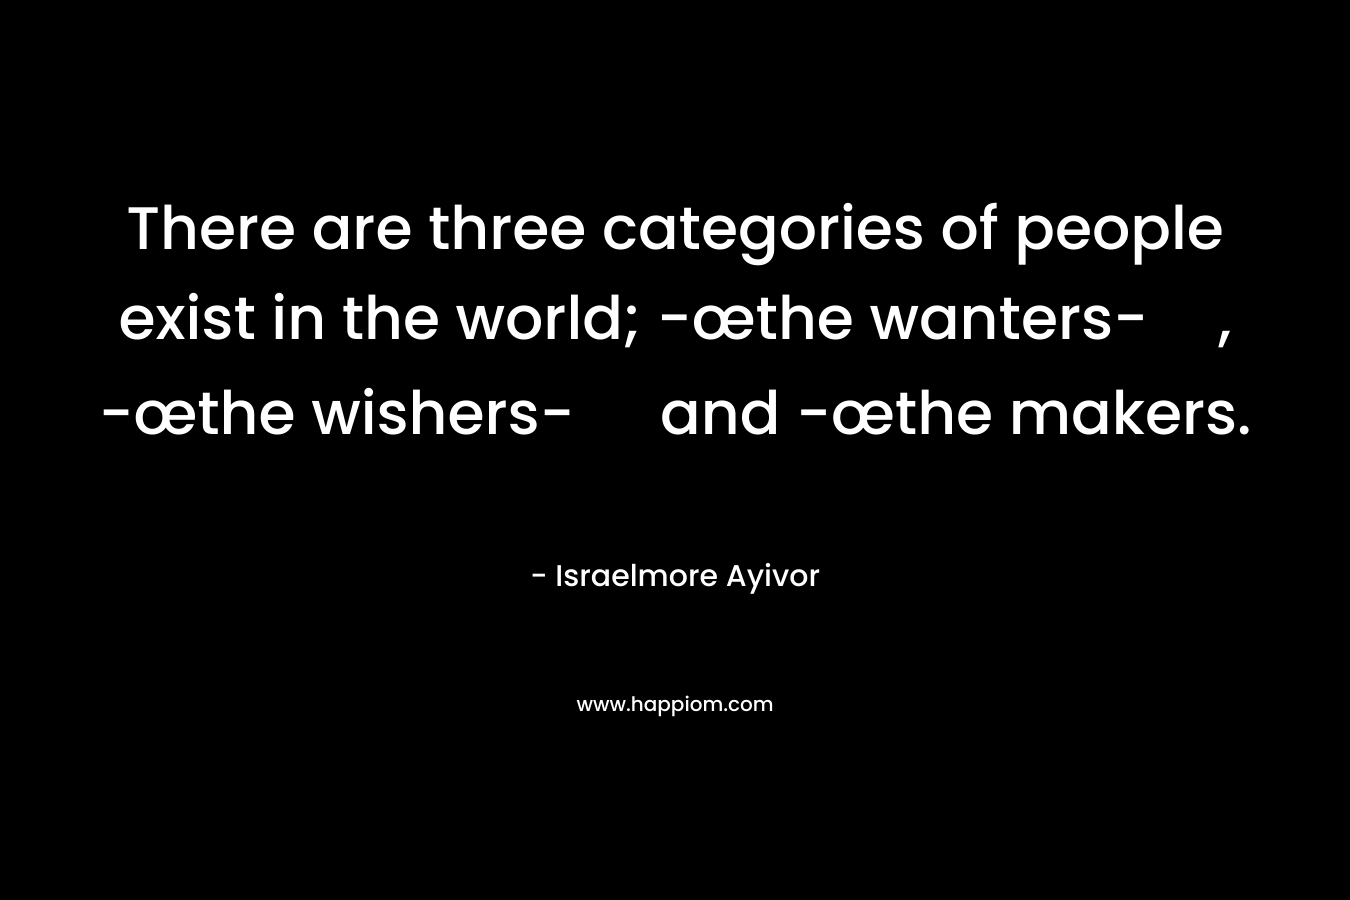 There are three categories of people exist in the world; -œthe wanters-, -œthe wishers- and -œthe makers. – Israelmore Ayivor